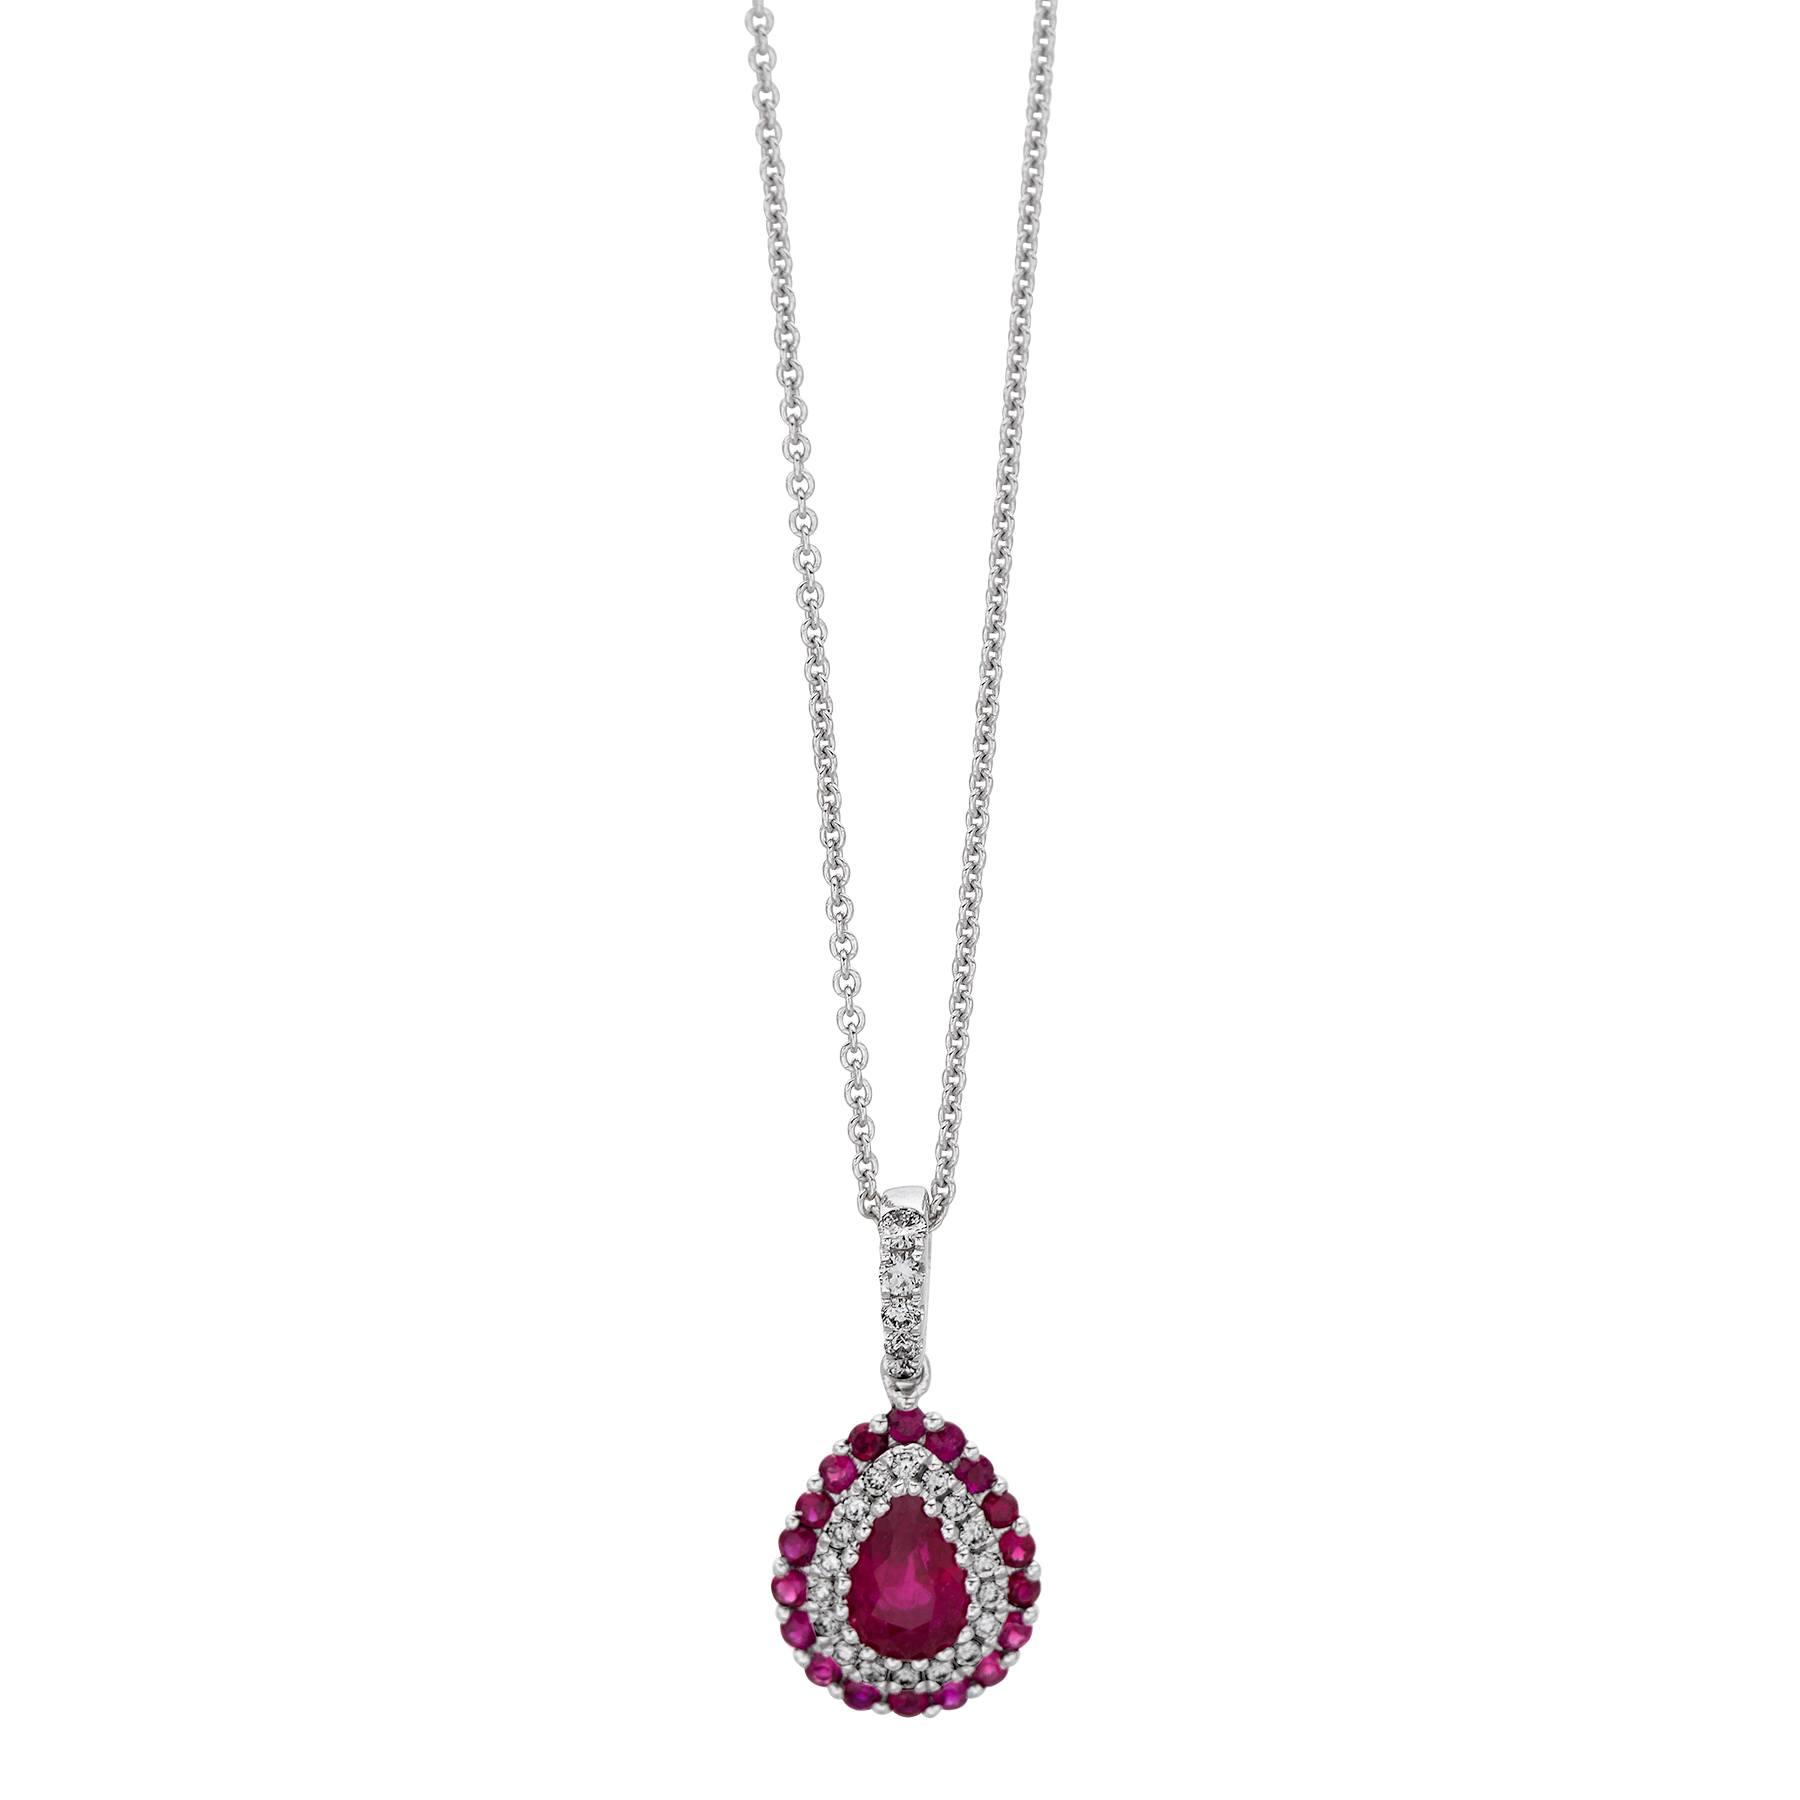 White Gold Pear Shaped Ruby & Diamond Halo Pendant Necklace 0